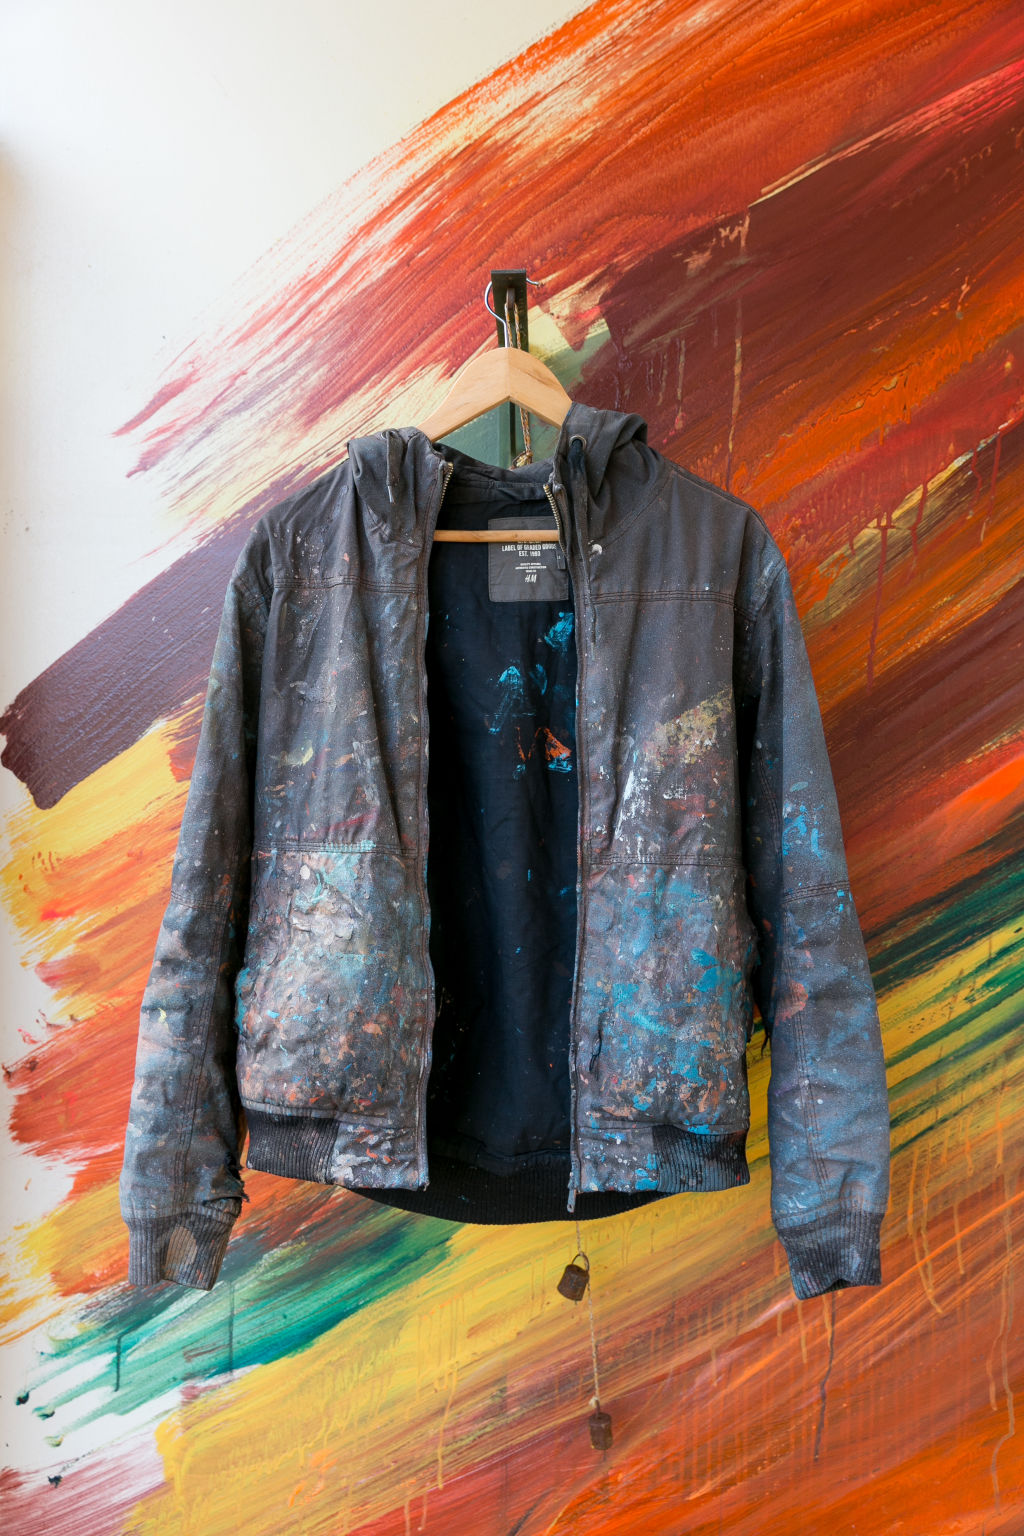 Adnate purchased this jacket in Berlin in 2011. Photo: Parker Blain.